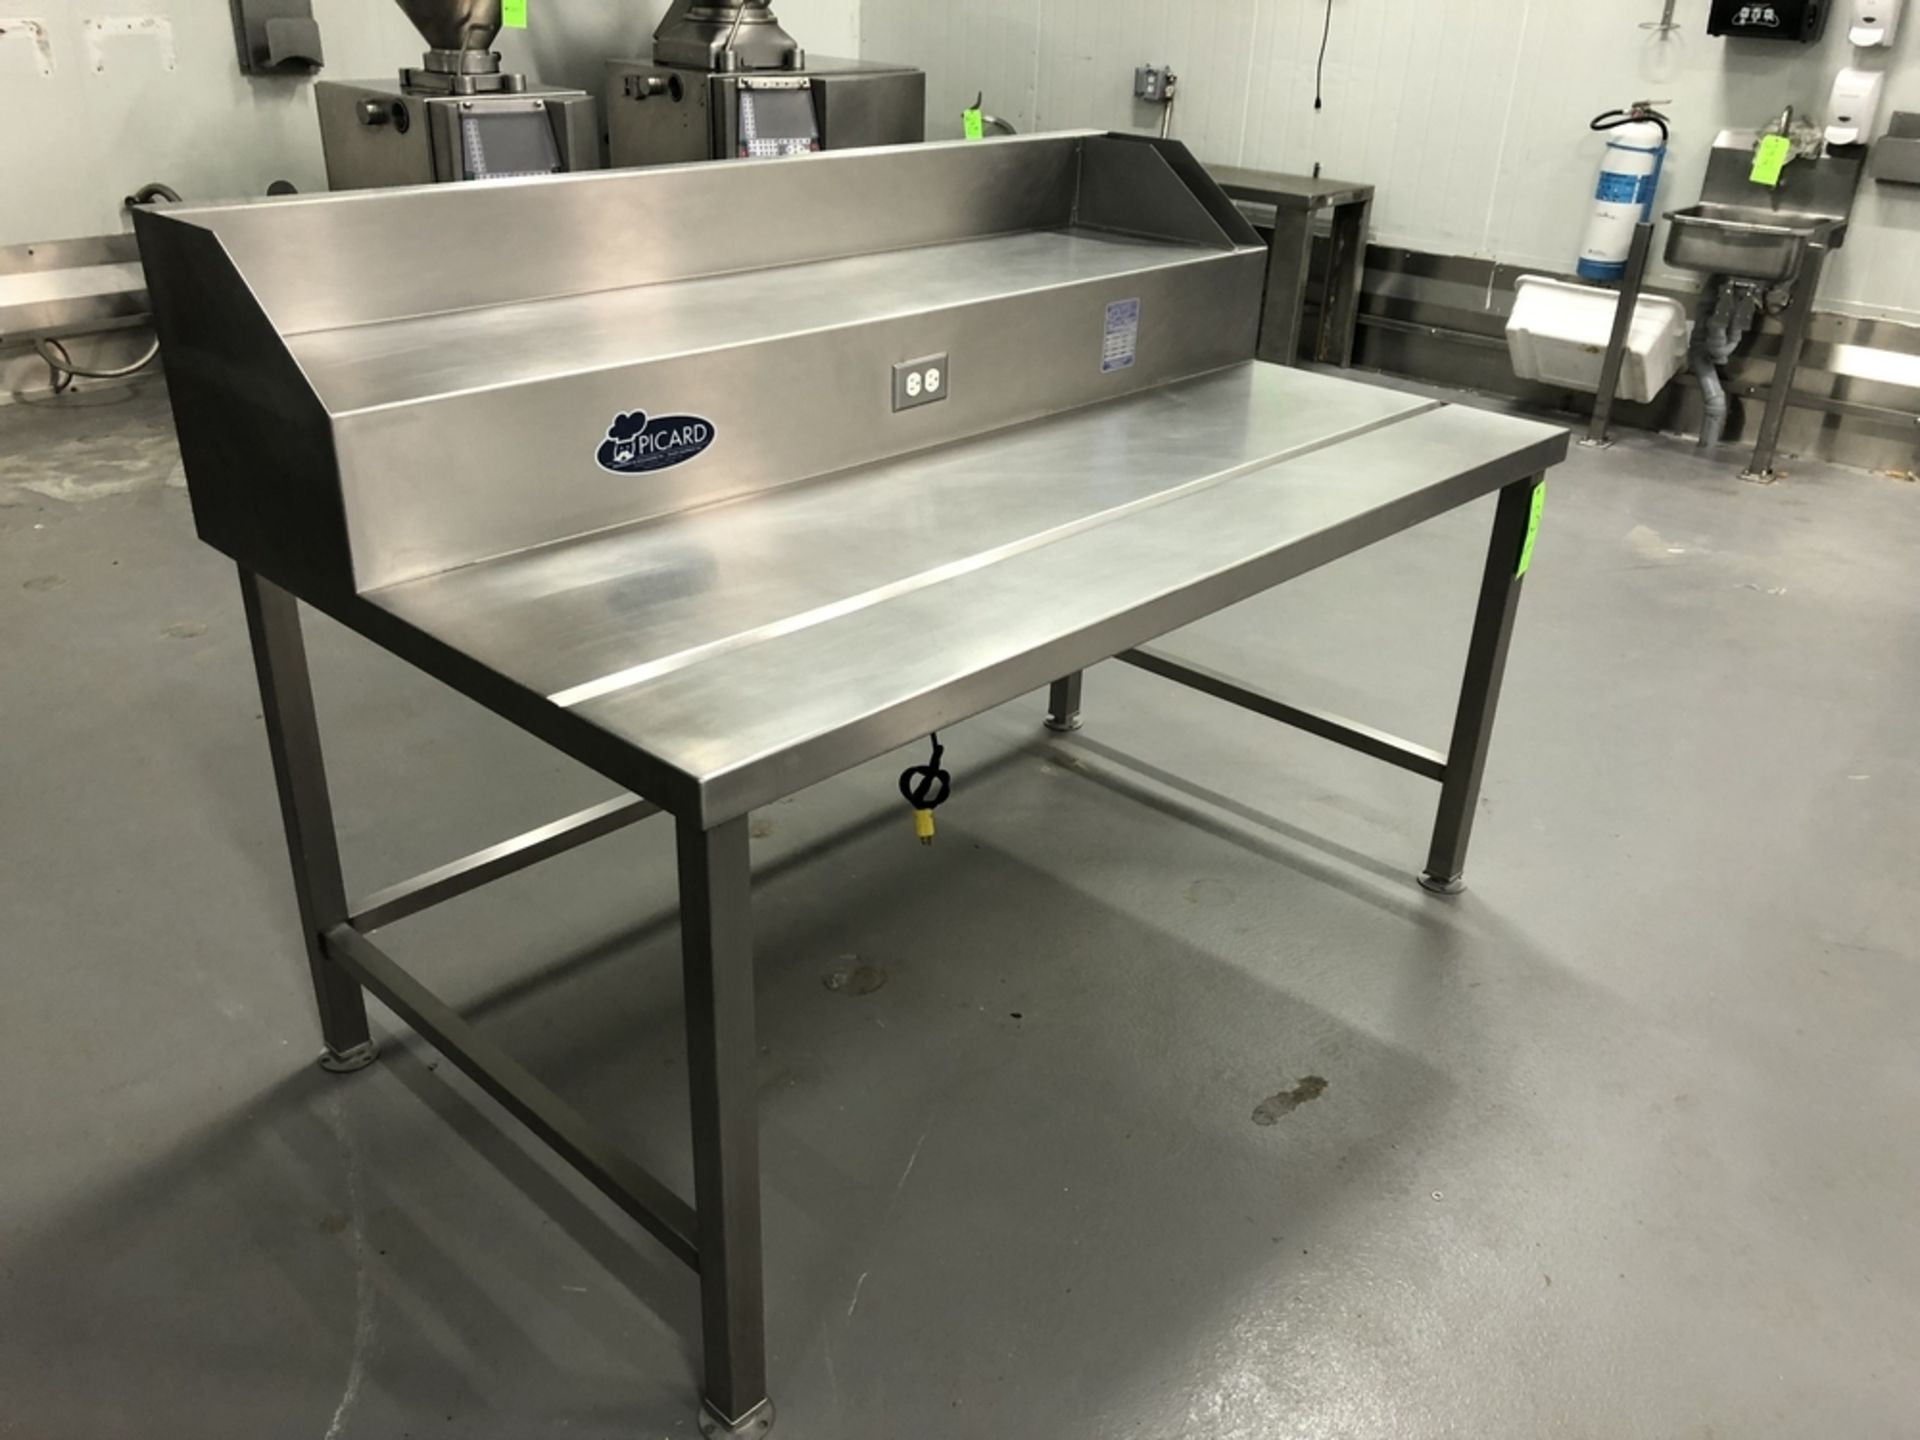 Picard Pre-Mix S/S Table, M/N LP 432-6, S/N 7010810, with Counter Side Electrical Outlet, and S/S - Image 2 of 3